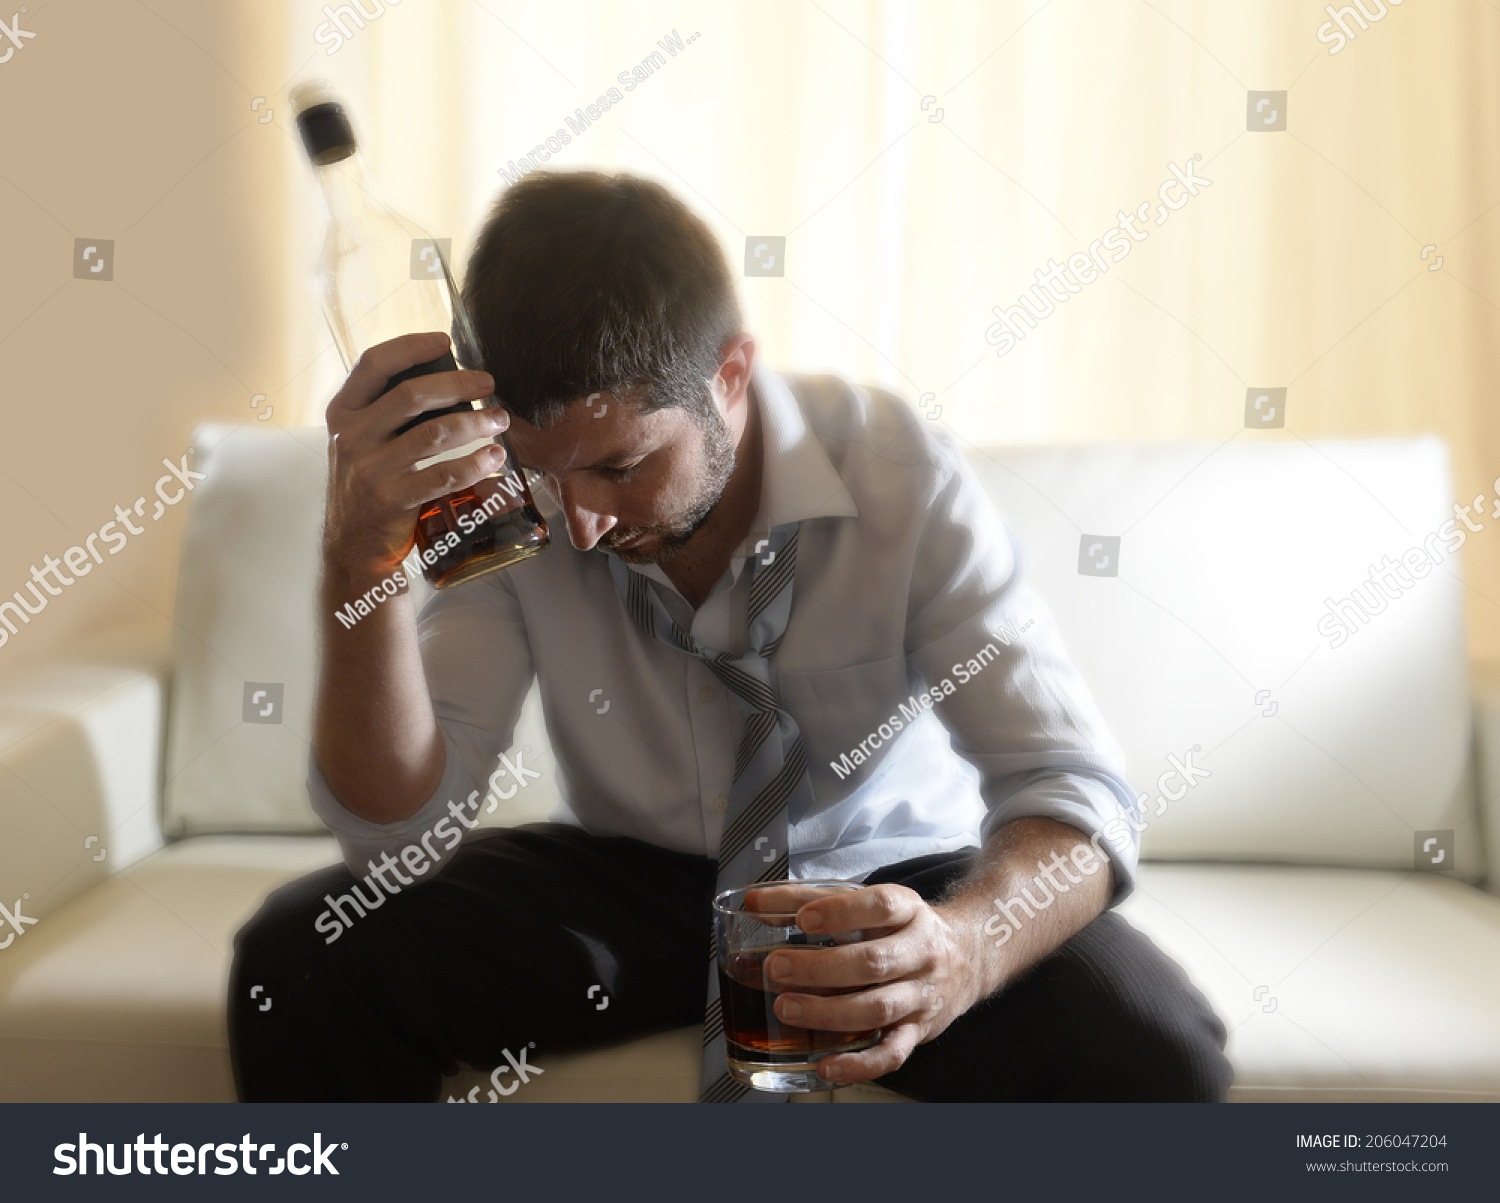  drunk business man at home lying asleep on couch sleeping wasted holding whiskey glass indoors in alcoholism problem , alcohol abuse and addiction concept looking messy and sick  #206047204